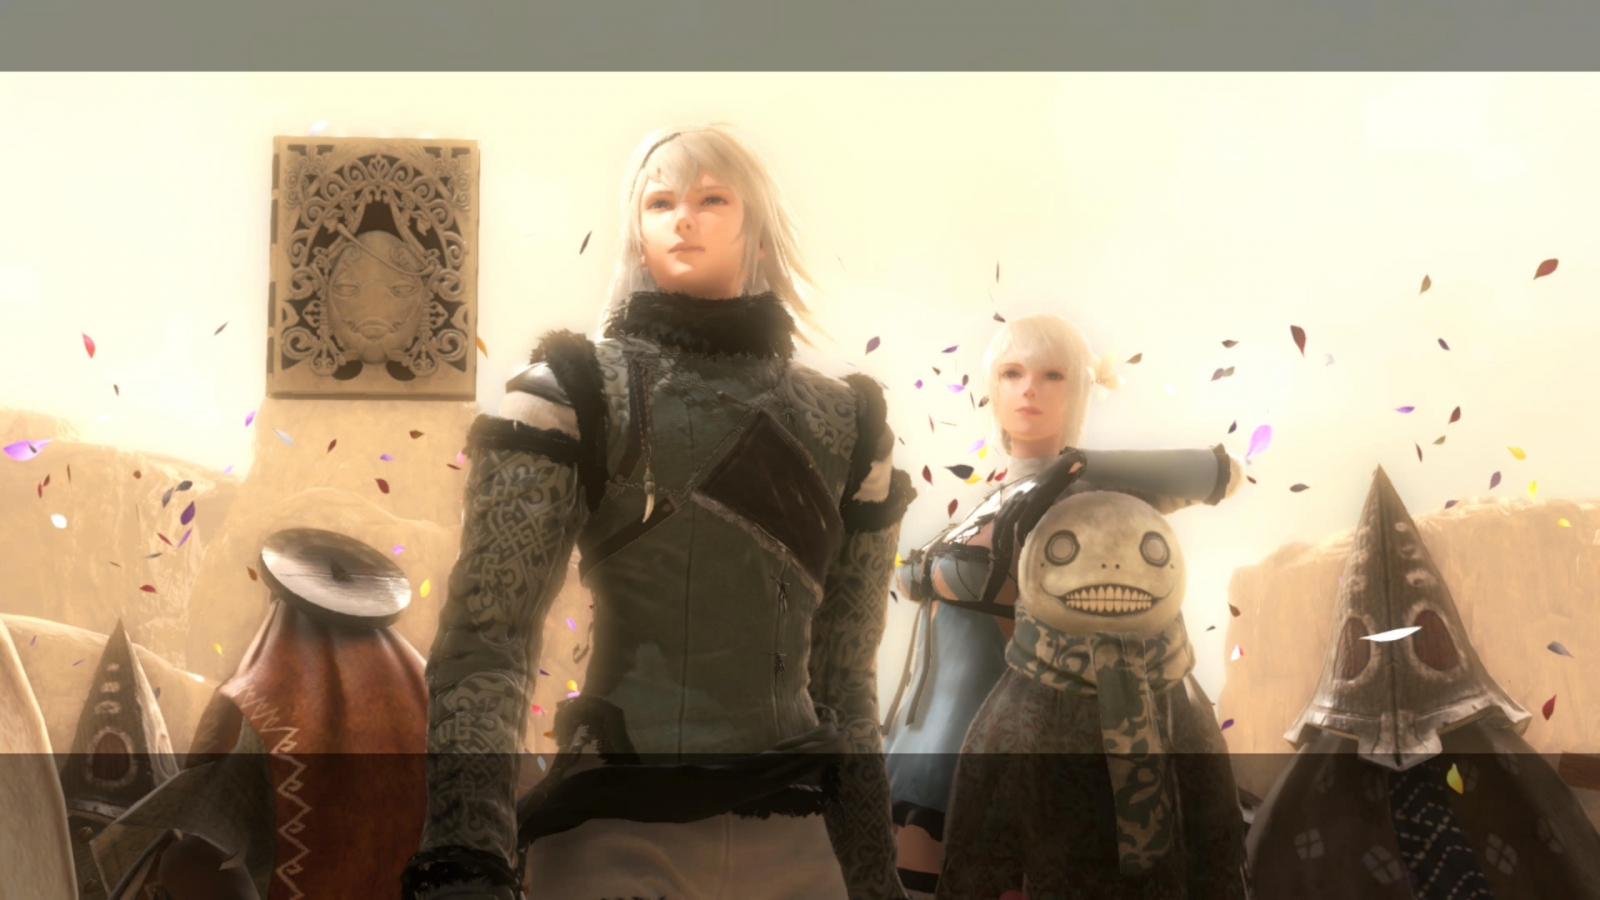 Everything New In NieR Replicant ver.1.22474487139